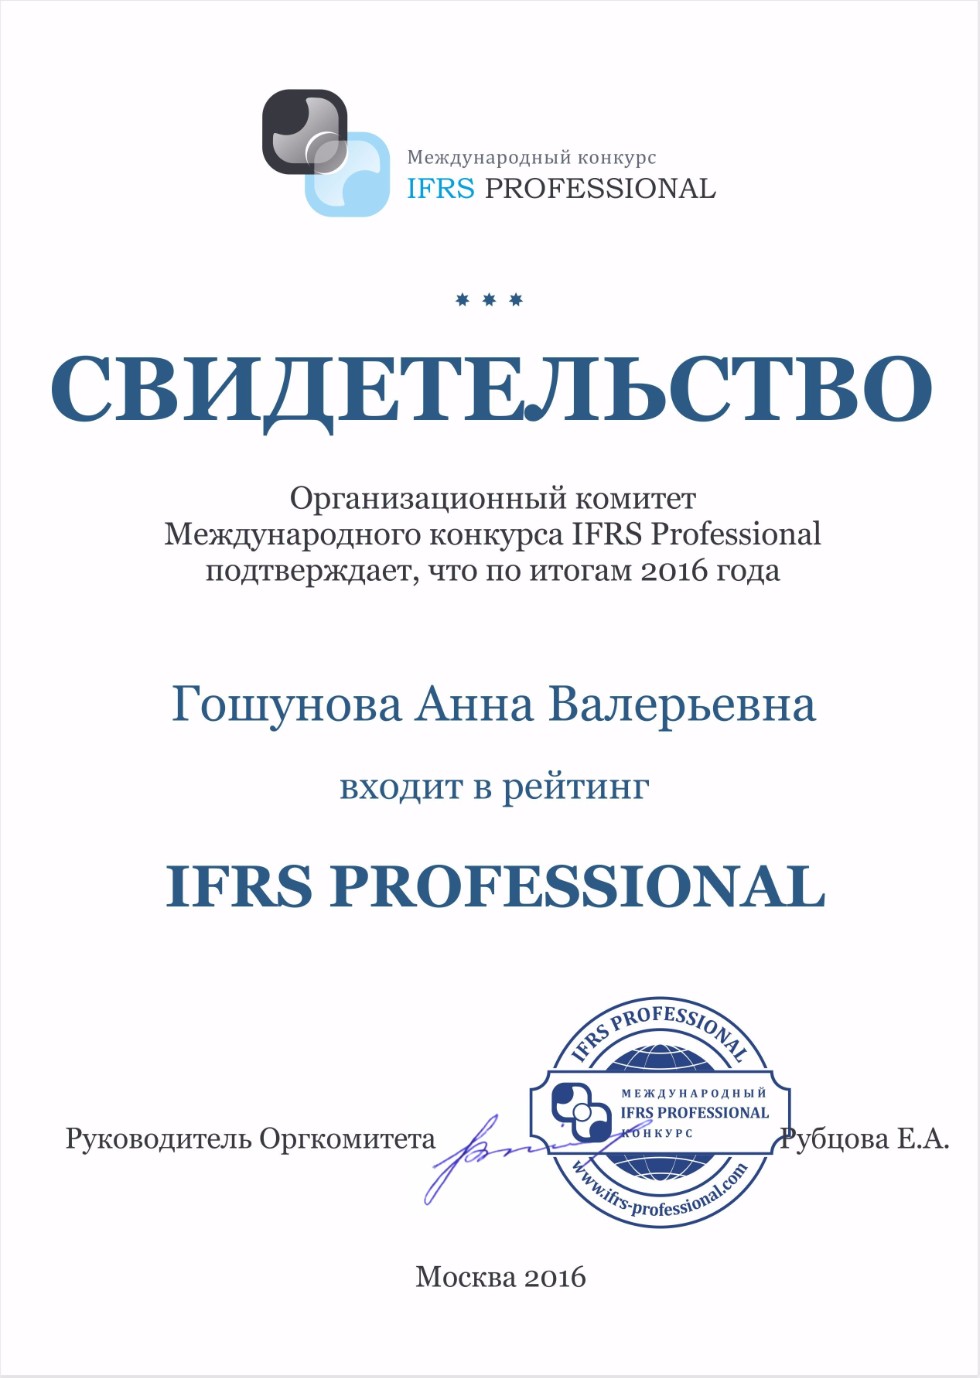  IFRS PROFESSIONAL ,IFRS Professional, ,   